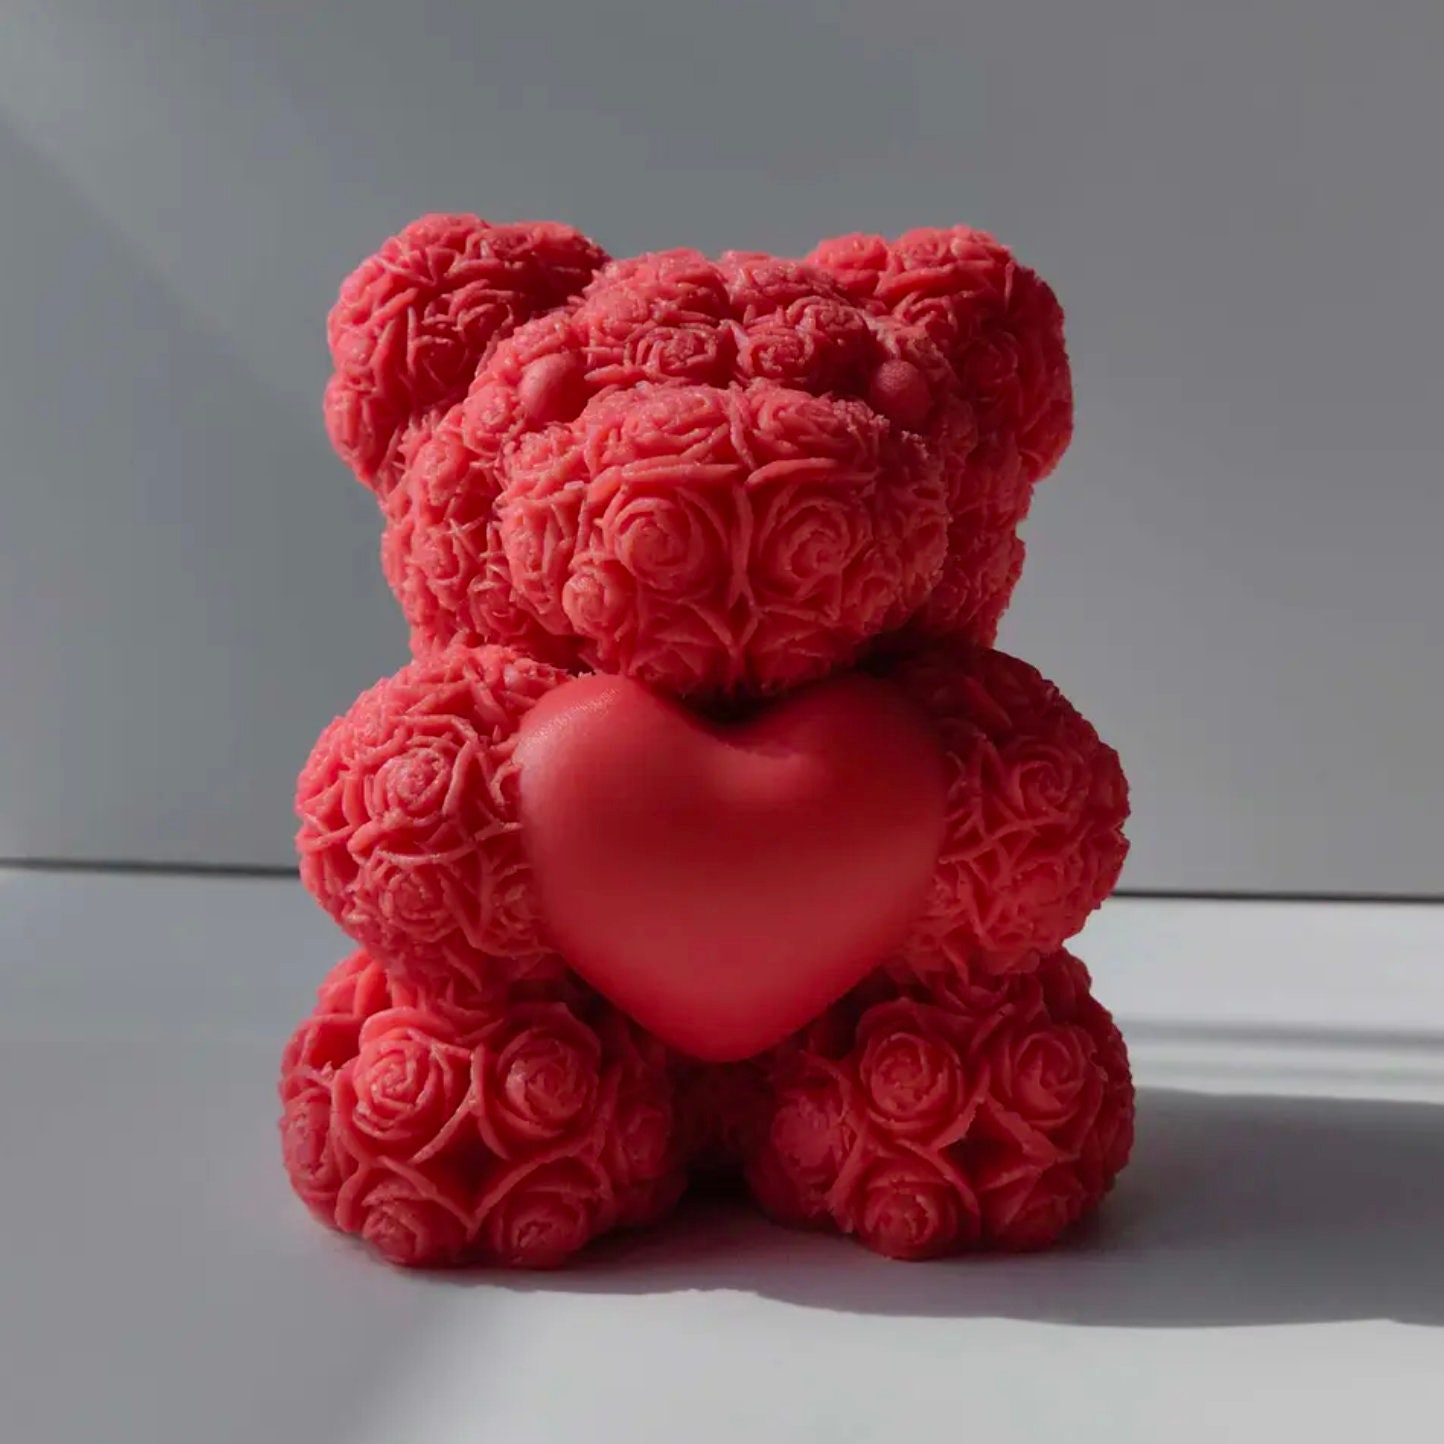  Midnadiy Rose Bear Candle Mold - 3D Teddy Bear Silicone Mold,  Large Epoxy Resin Molds for DIY Scented Candles, Handmade Soaps, Birthday  Gifts, Christmas Gifts, Valentines Day Gifts, Wedding Gifts